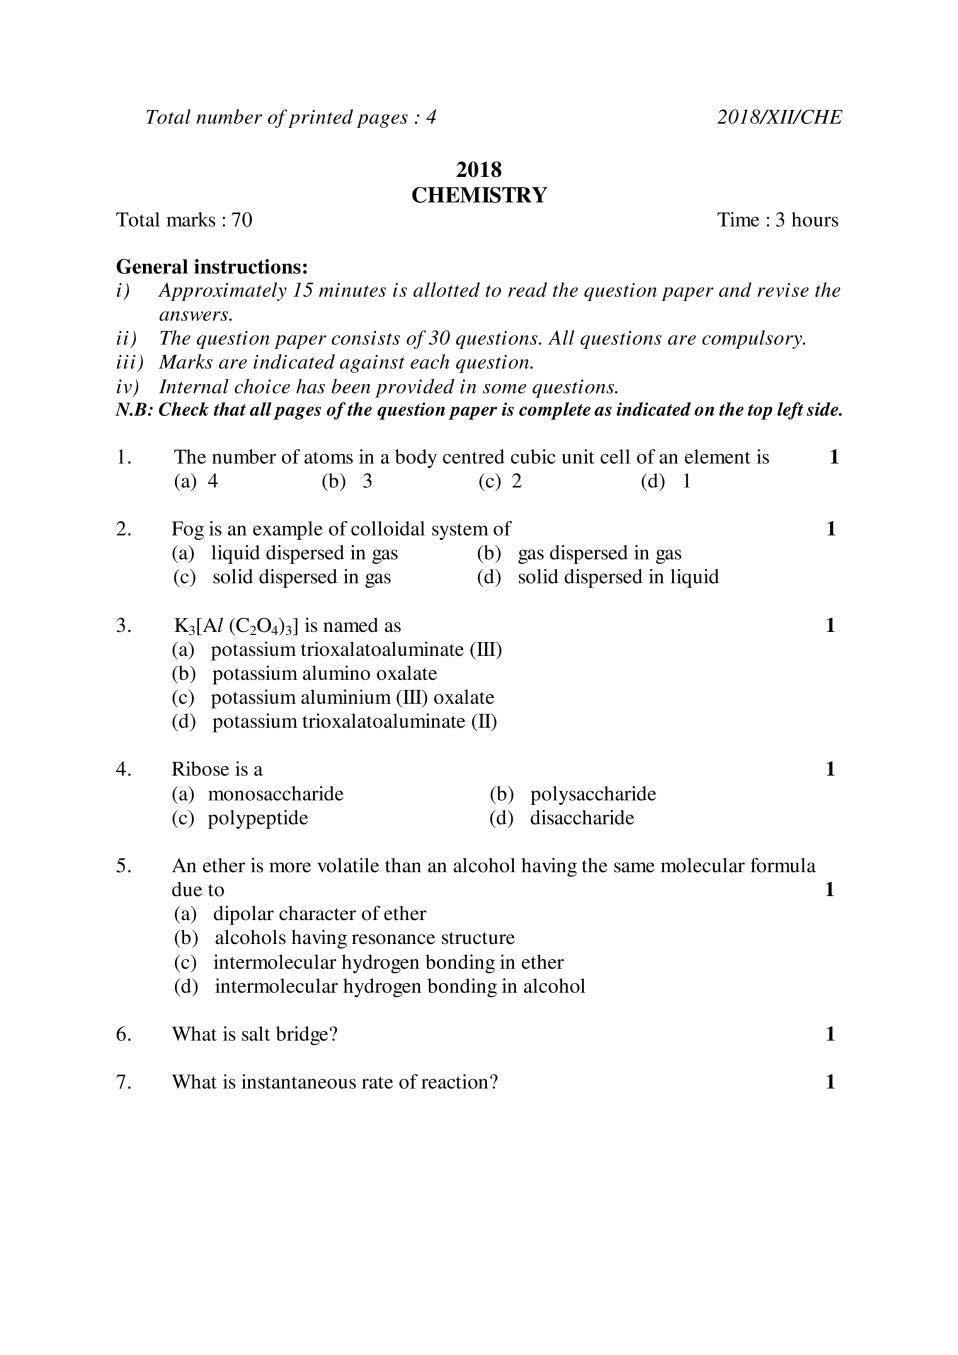 NBSE Class 12 Question Paper 2018 for Chemistry - Page 1